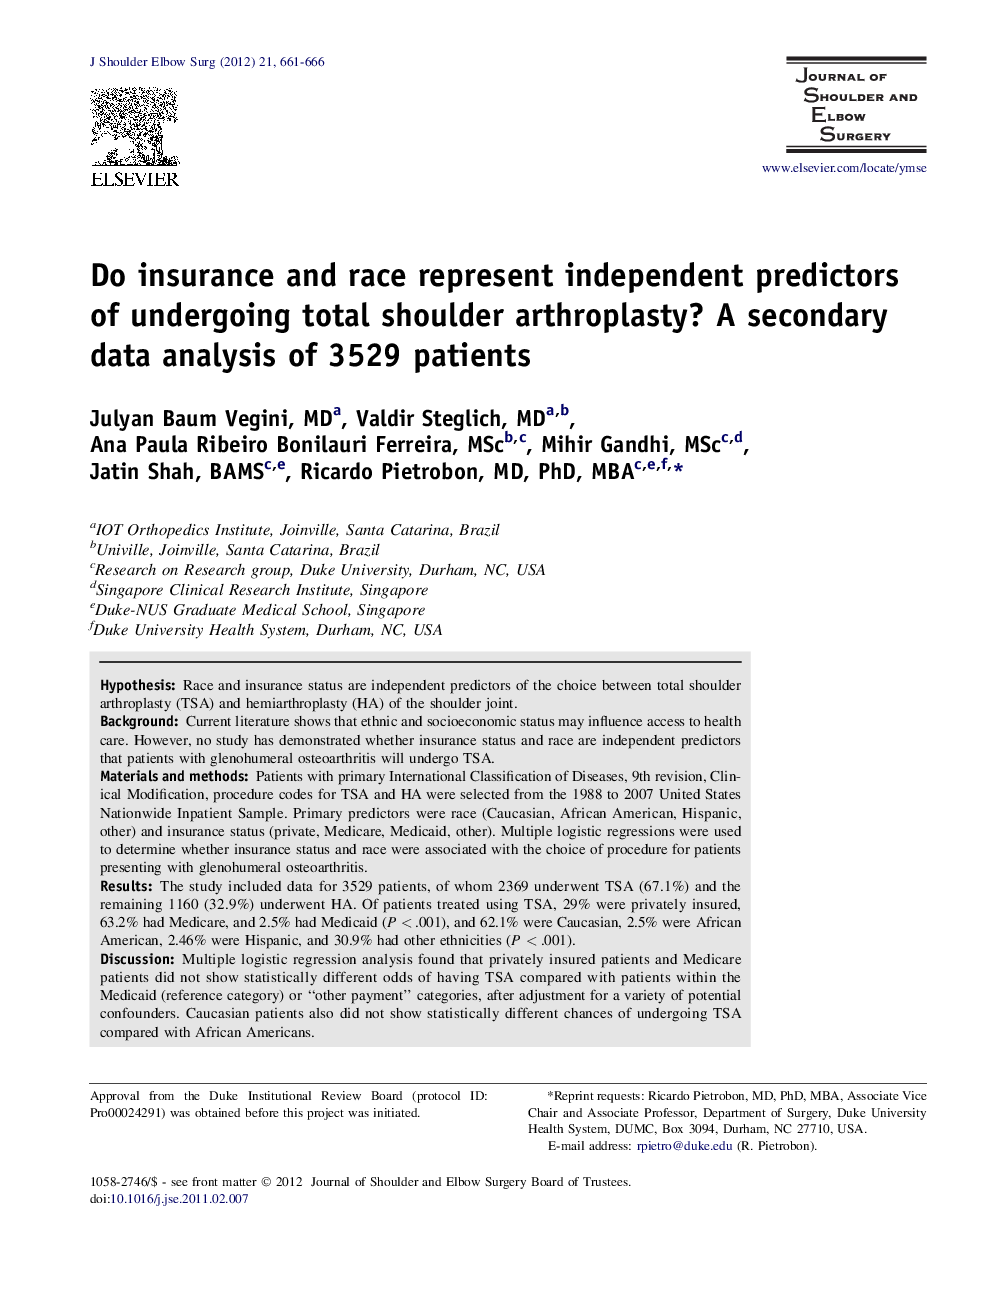 Do insurance and race represent independent predictors of undergoing total shoulder arthroplasty? A secondary data analysis of 3529 patients 